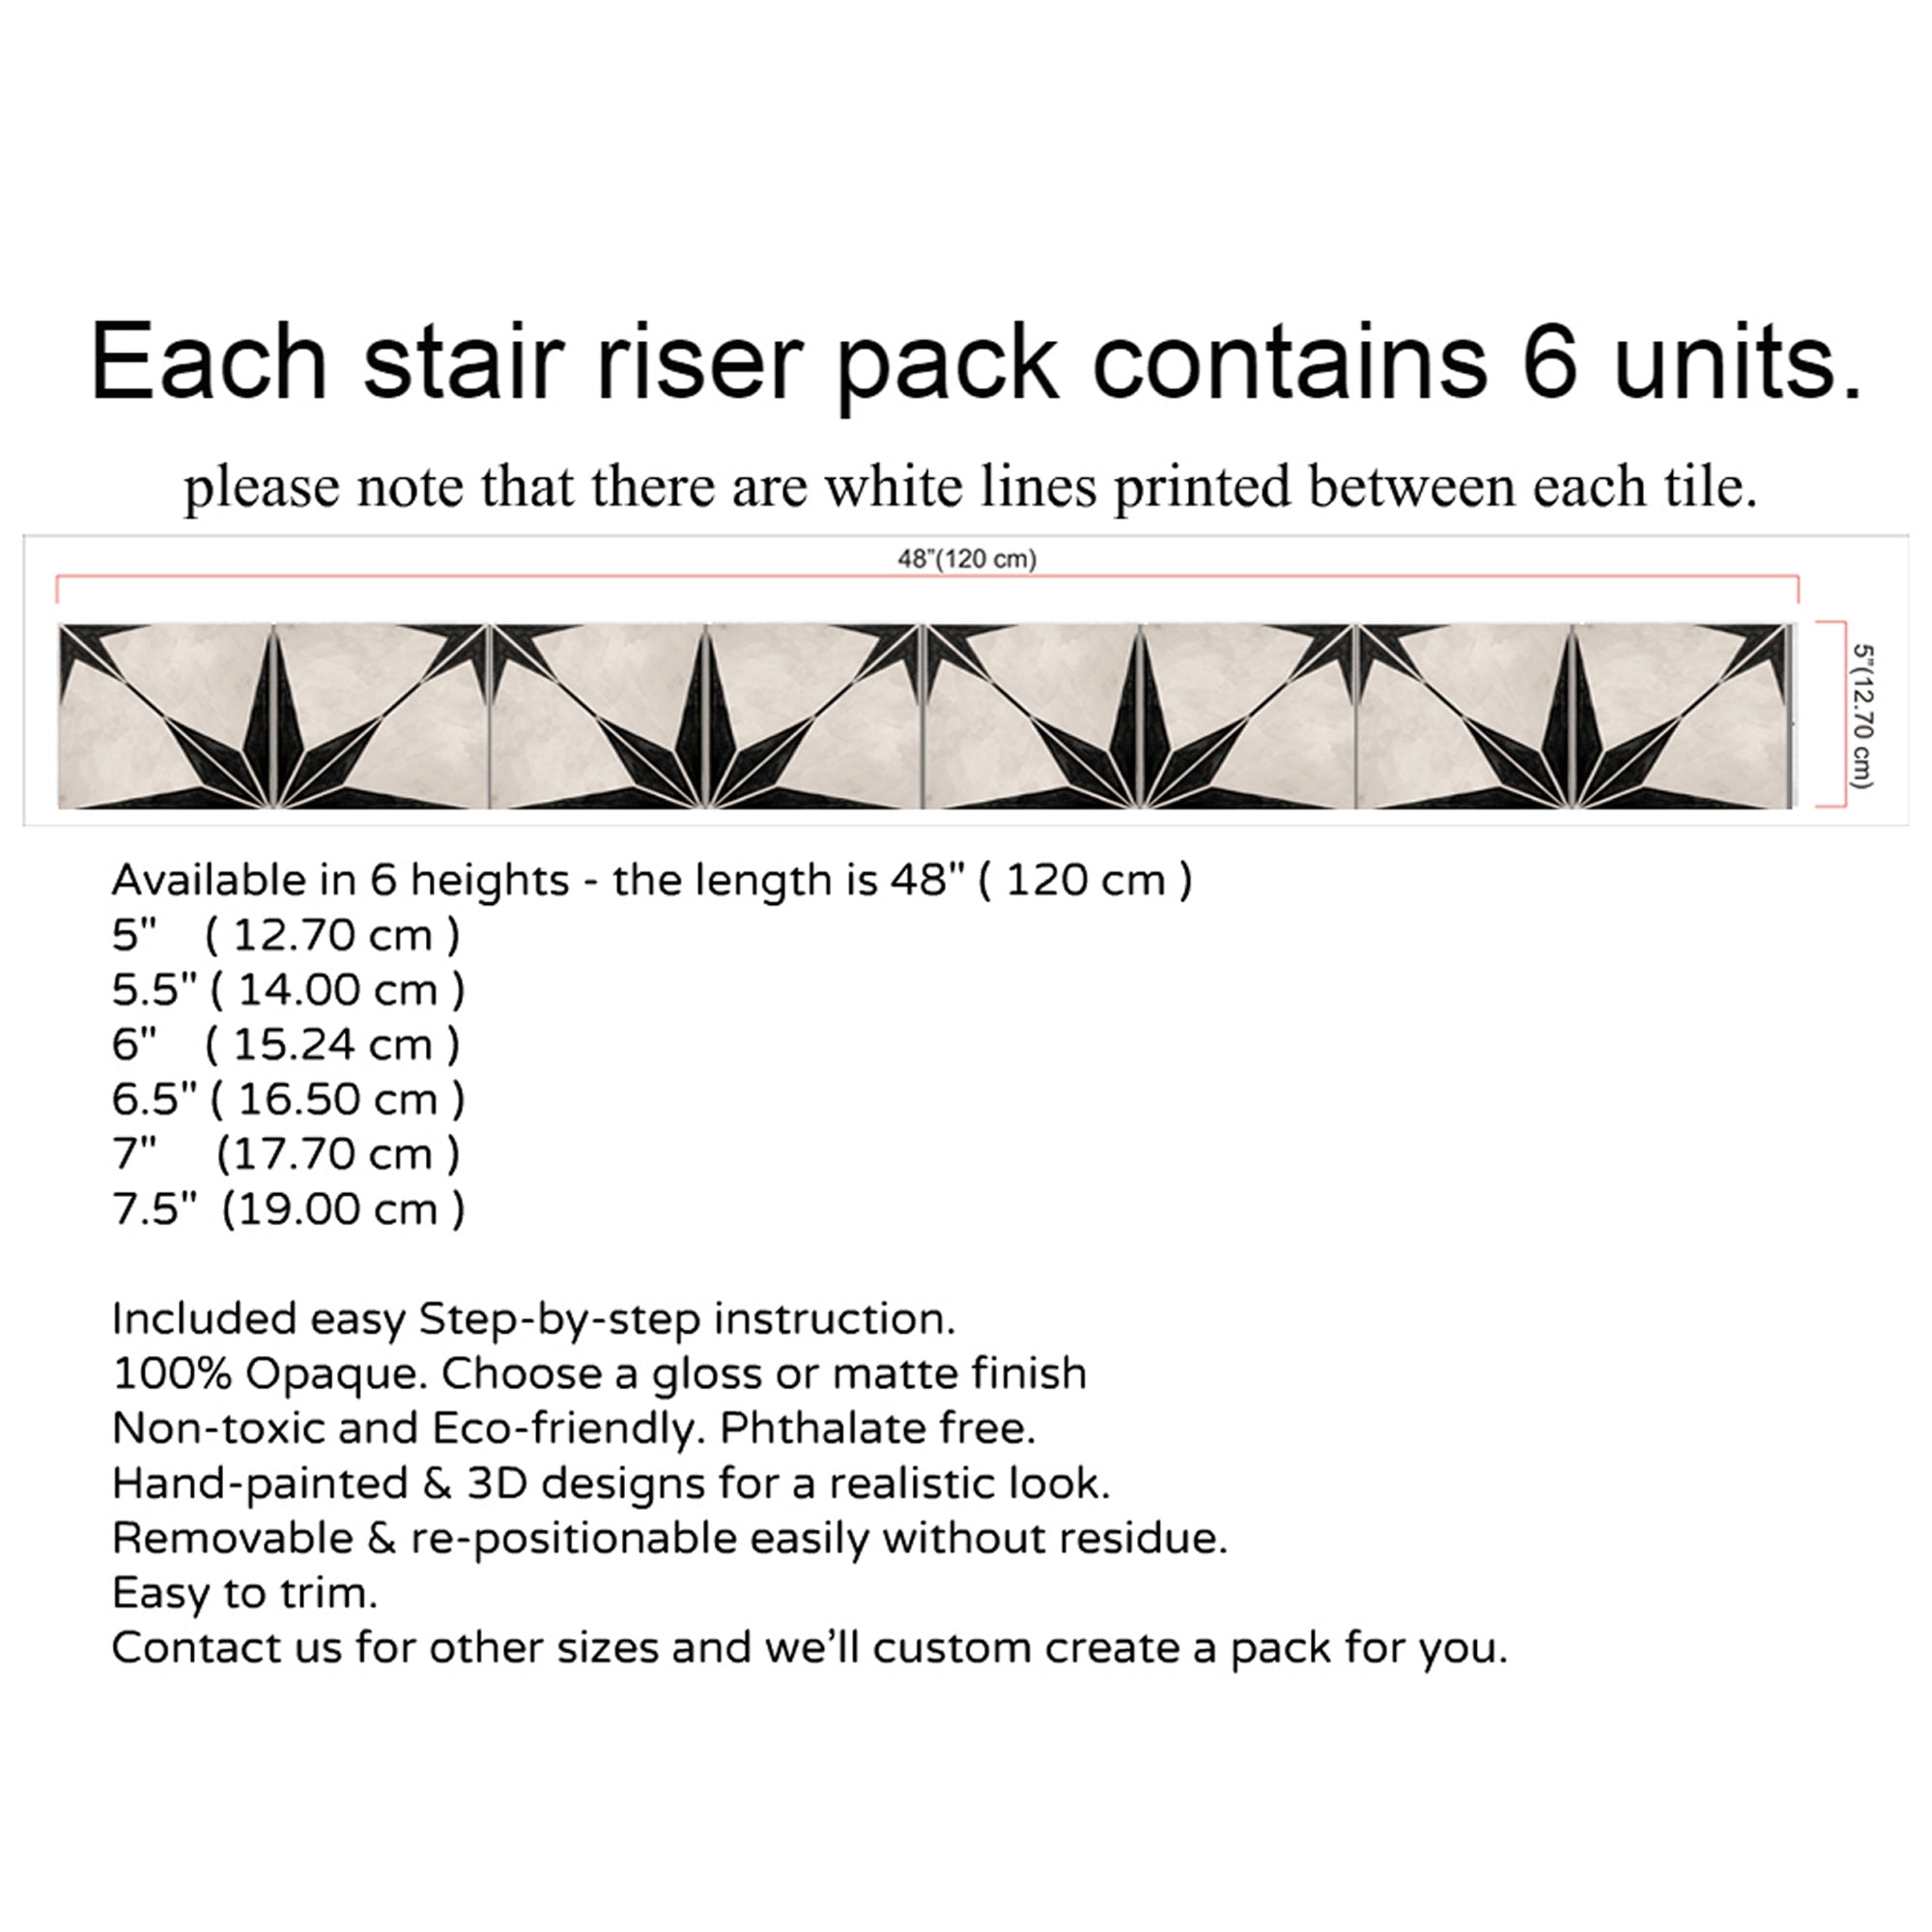 PROMO! Astra in Black Stair Riser Stickers - 7 strips in 7" height x 48" long